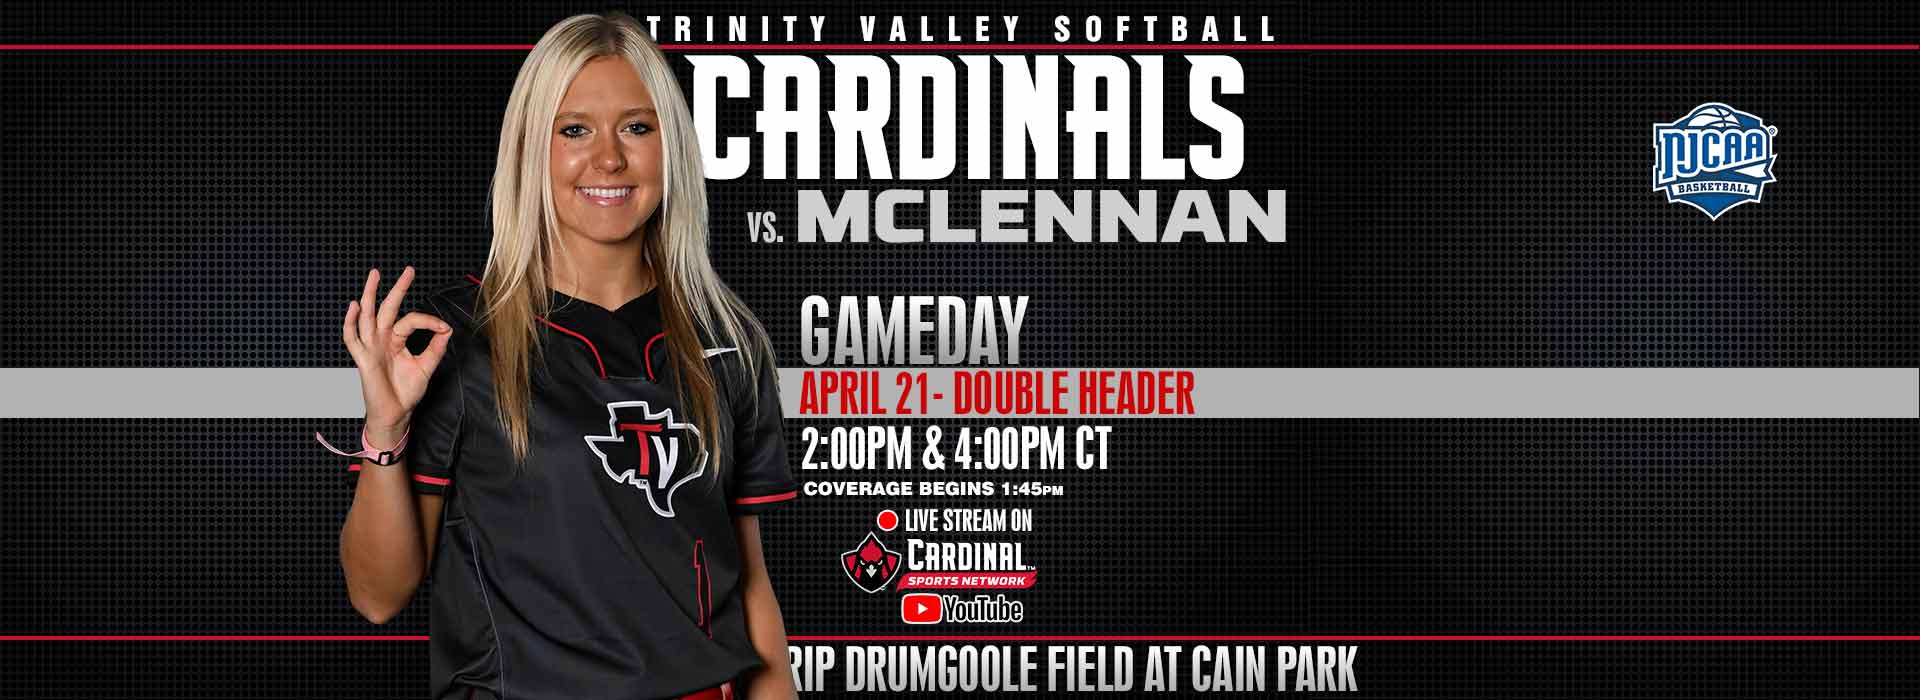 Trinity Valley Softball Cardinals vs. McLennan. Gameday April 21, Double Header.  2:00pm & 4:00pm CT. Coverage begins 1:45pm.  Live stream on Cardinal Sports Network YouTube channel.  Rip Drumgoole Field at Cain Park.